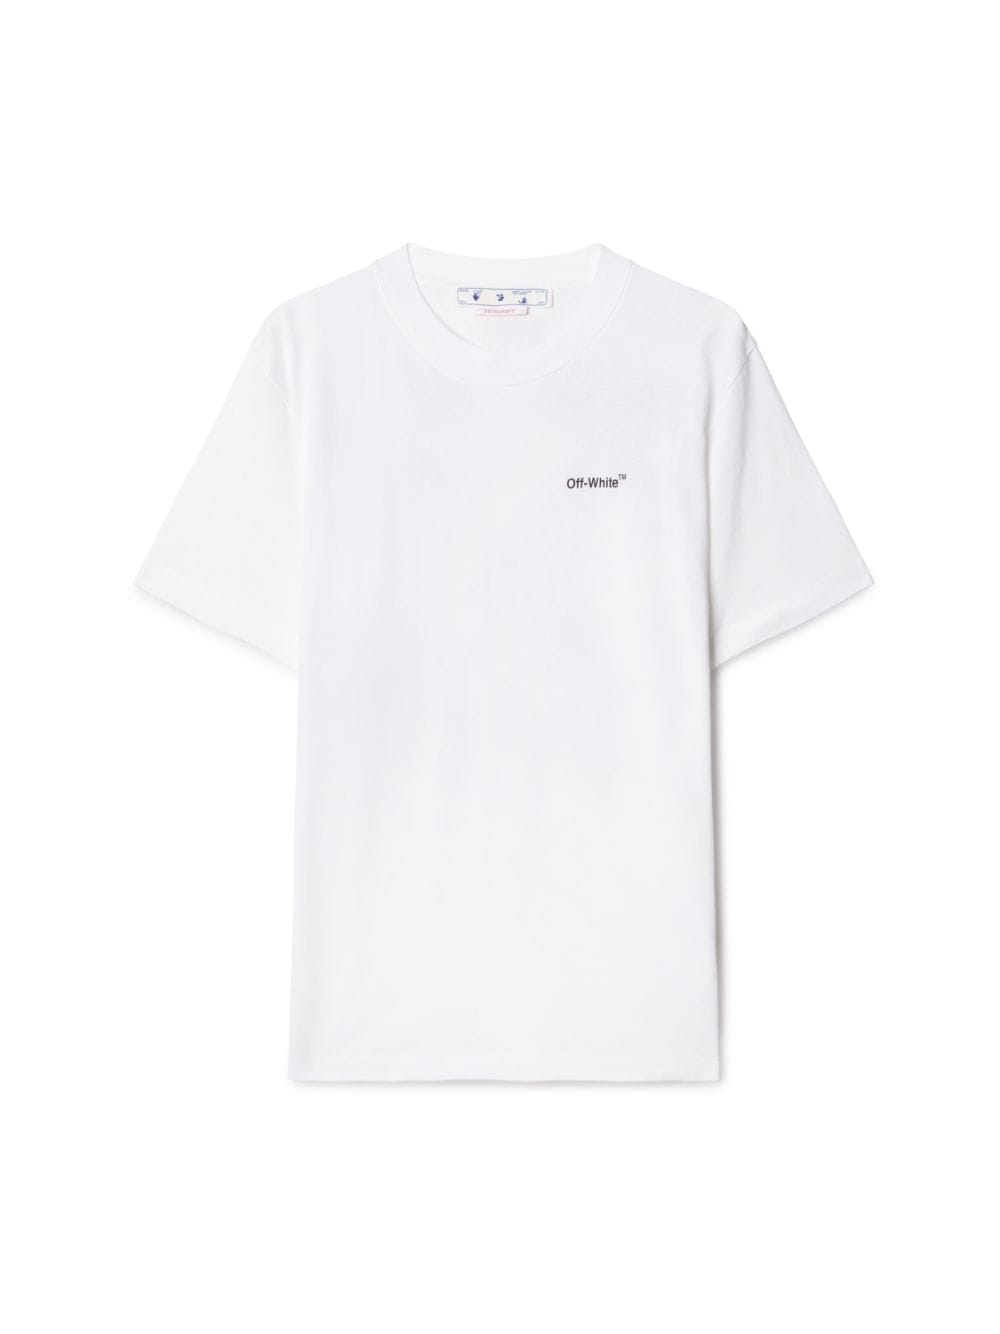 CARAVAGGIO ARROW SLIM TEE in | Off-White™ Official